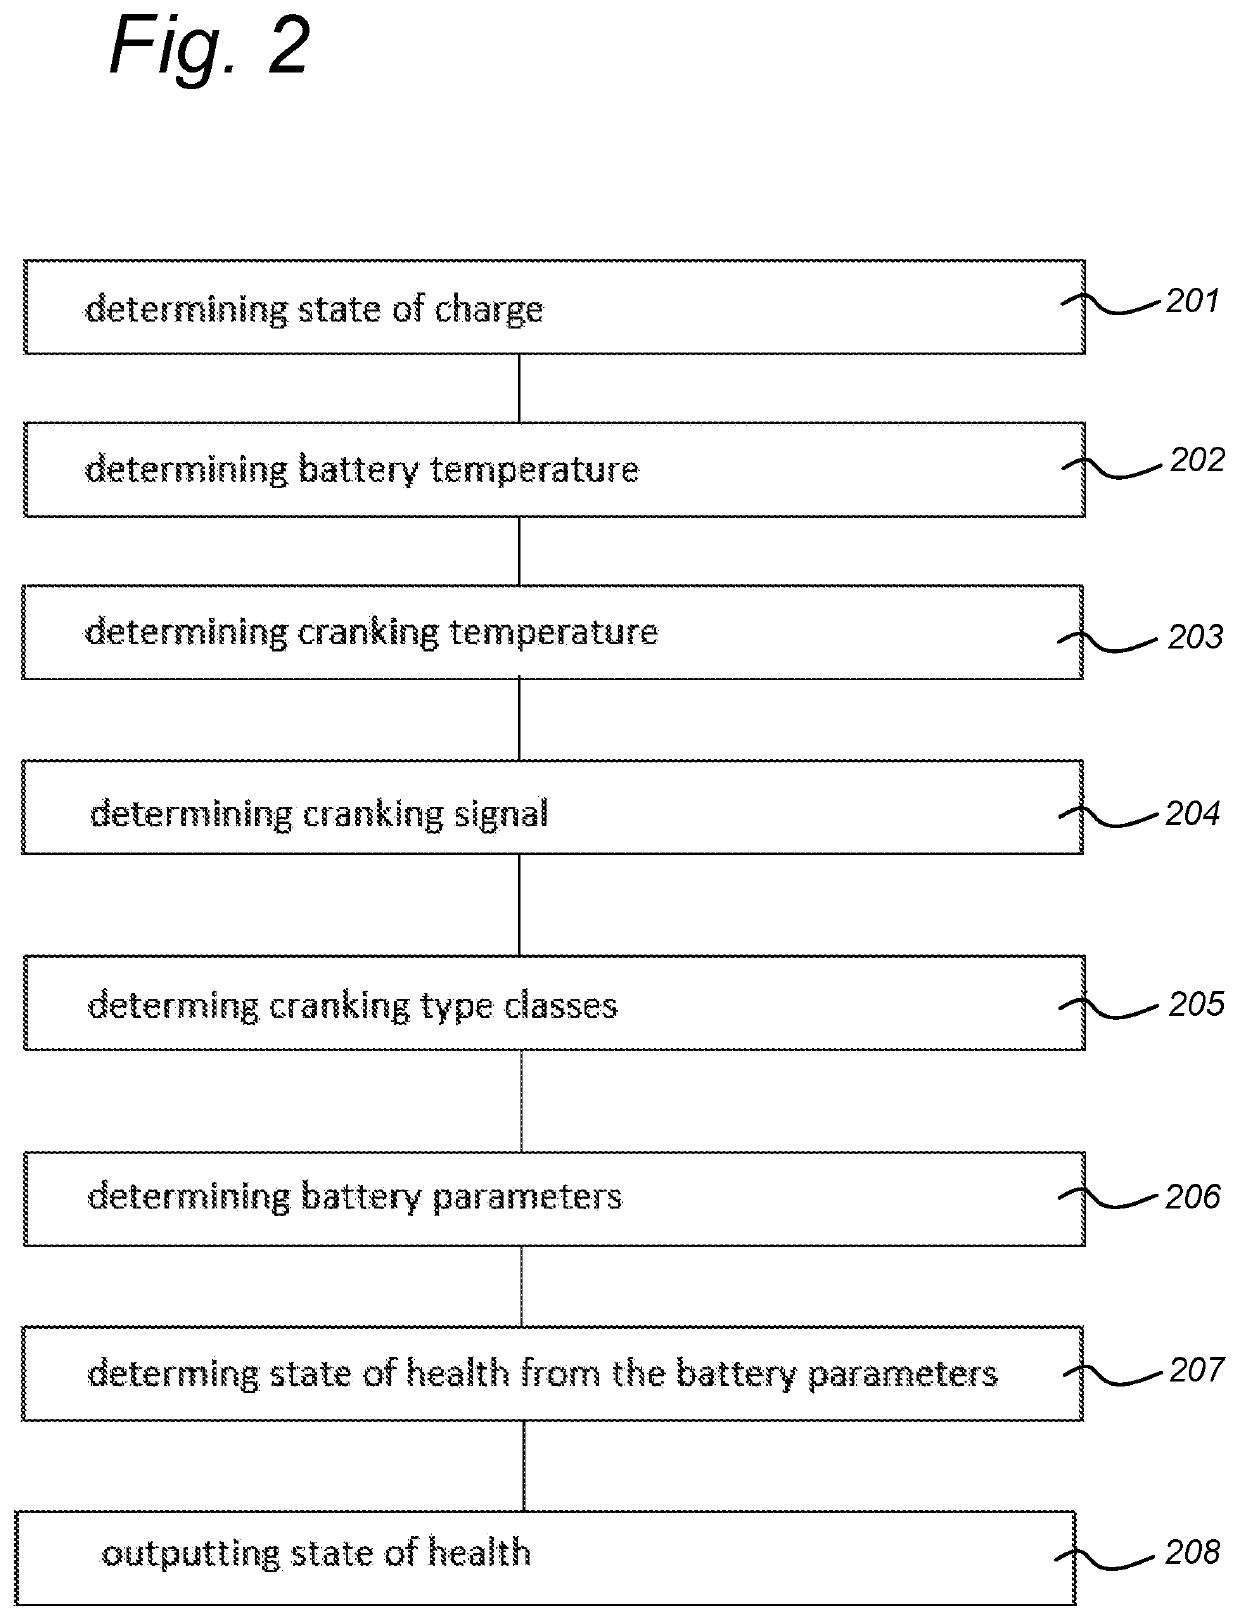 Method and apparatus for indicating a state of health of a battery